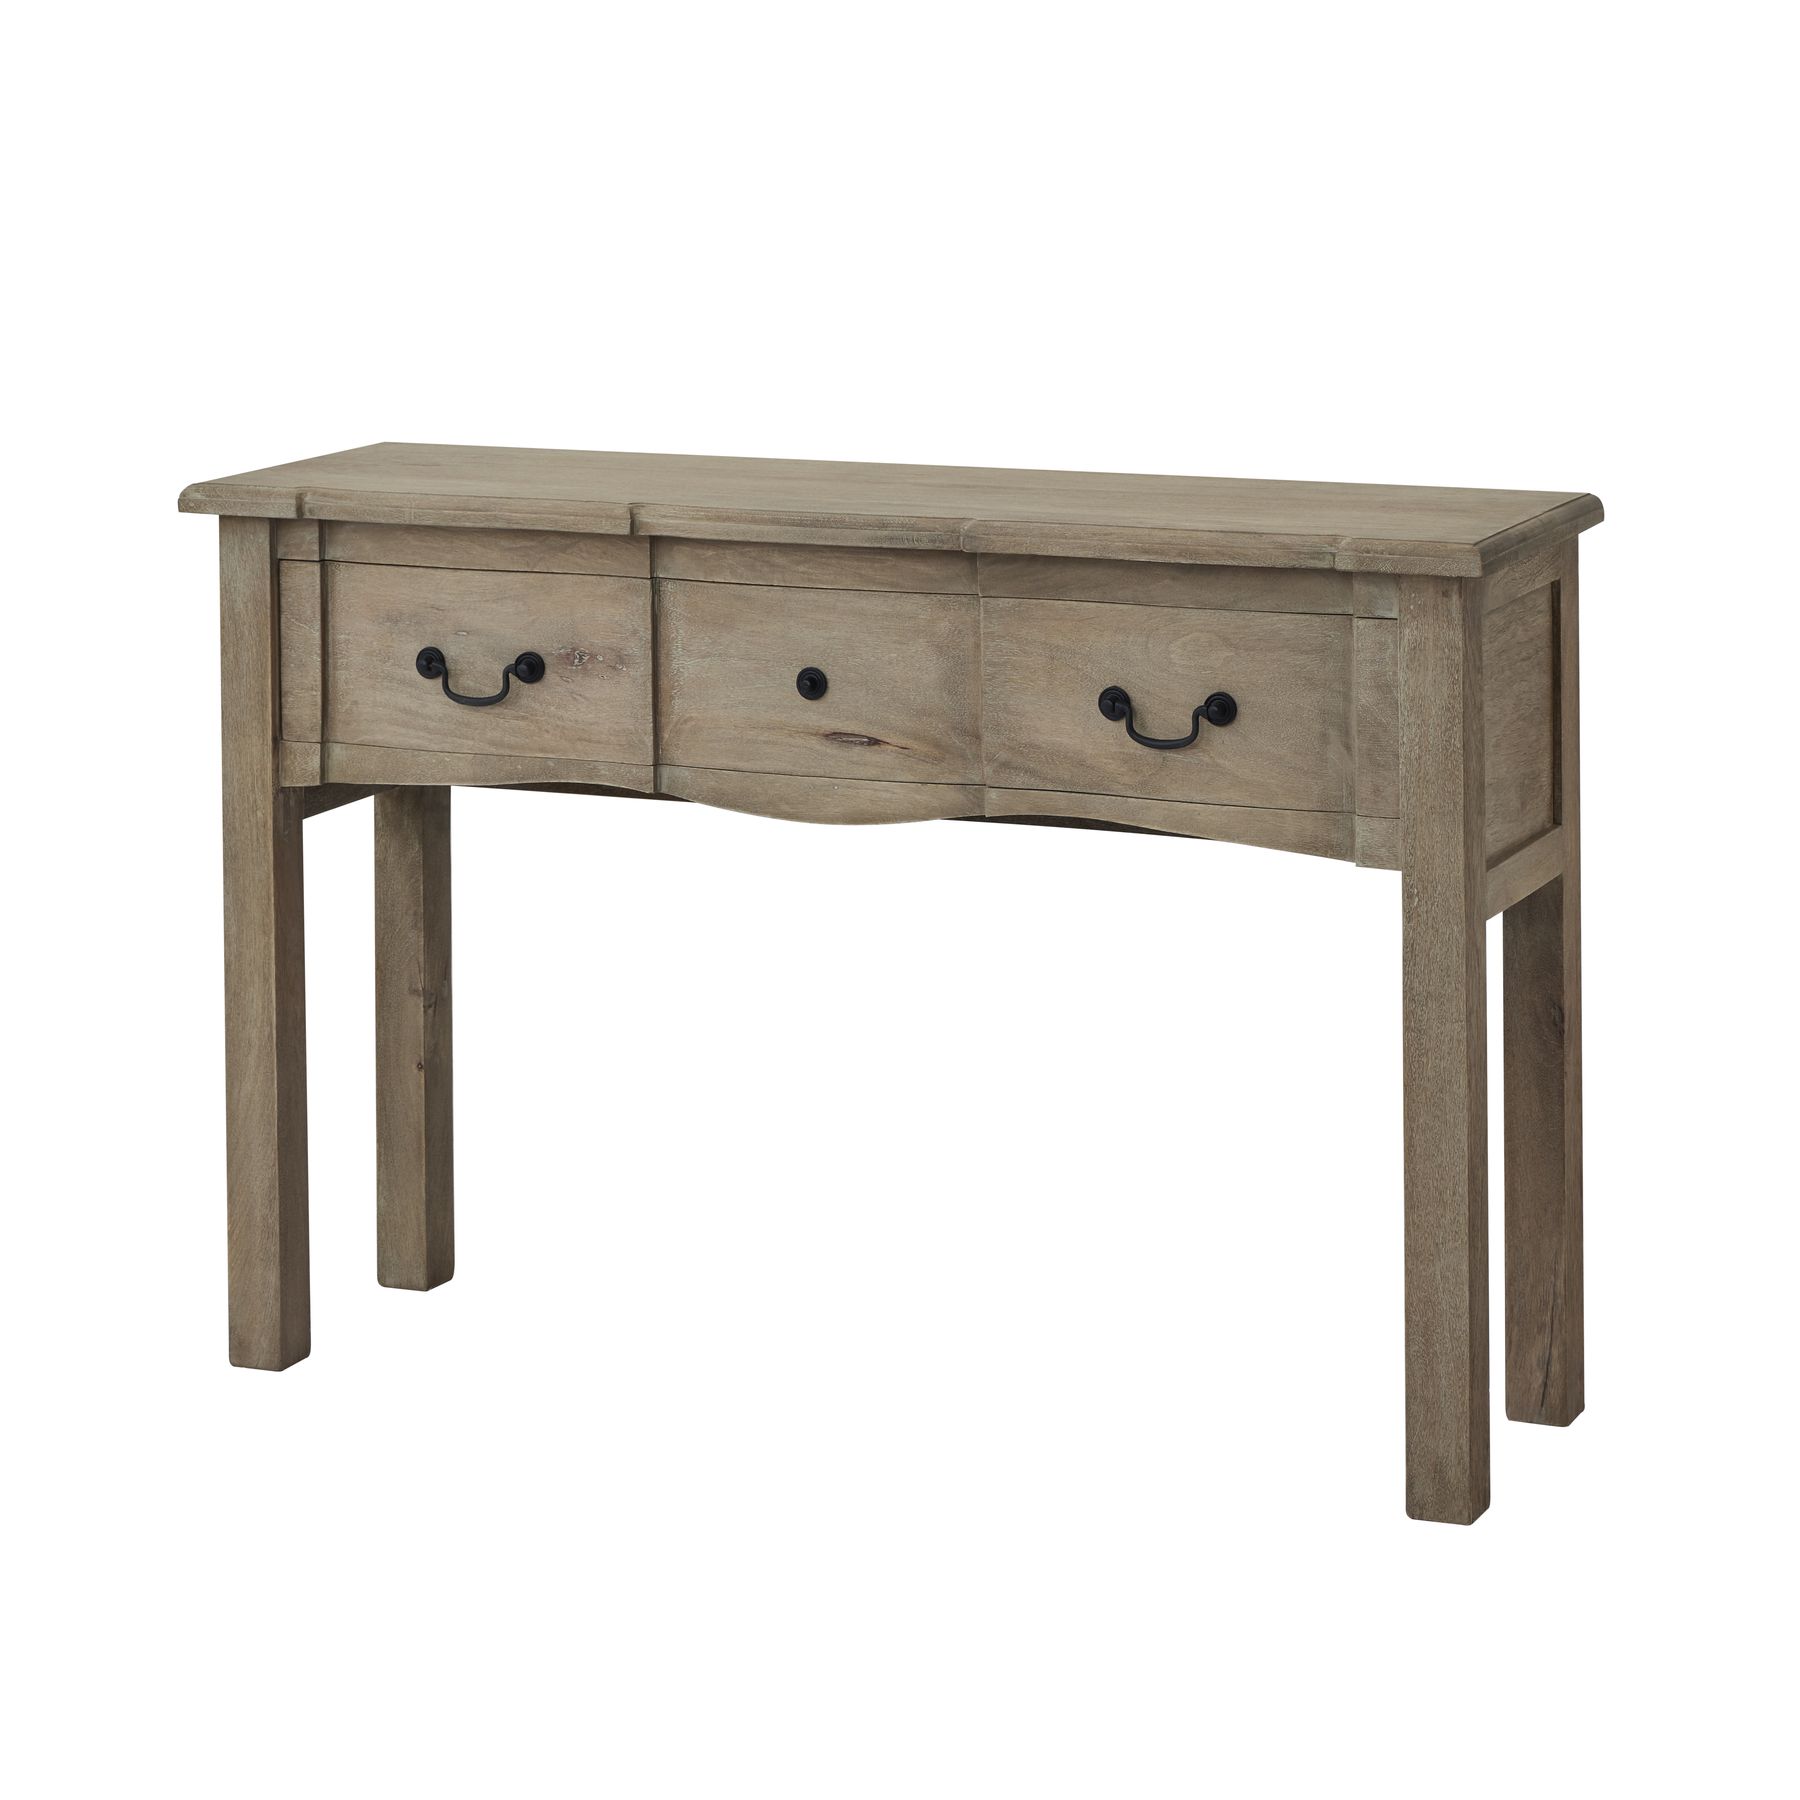 Copgrove Collection 1 Drawer Console - Image 1